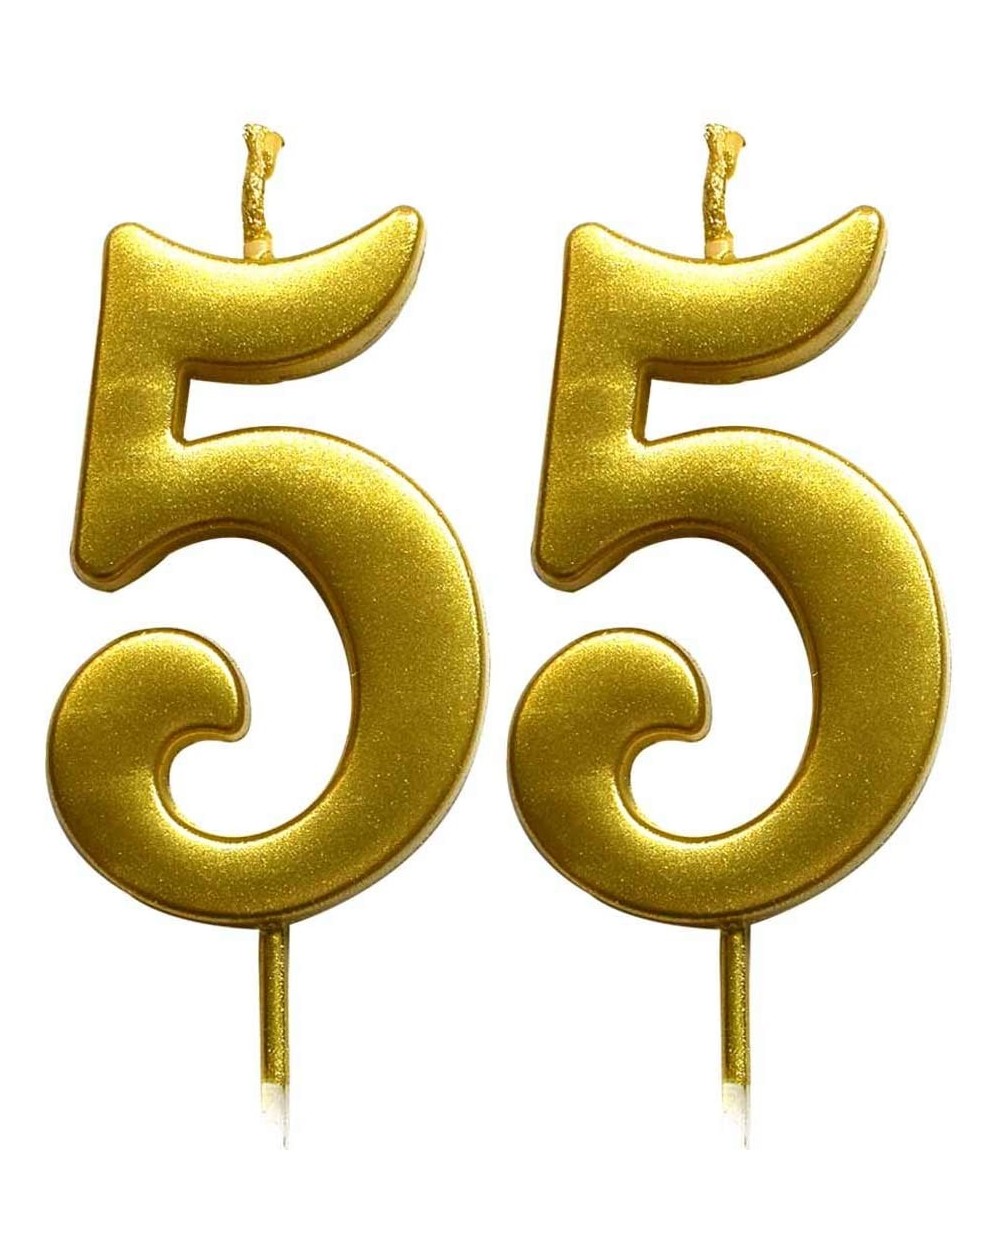 Birthday Candles Gold 55th Birthday Numeral Candle- Number 55 Cake Topper Candles Party Decoration for Women or Men - C118TW7...